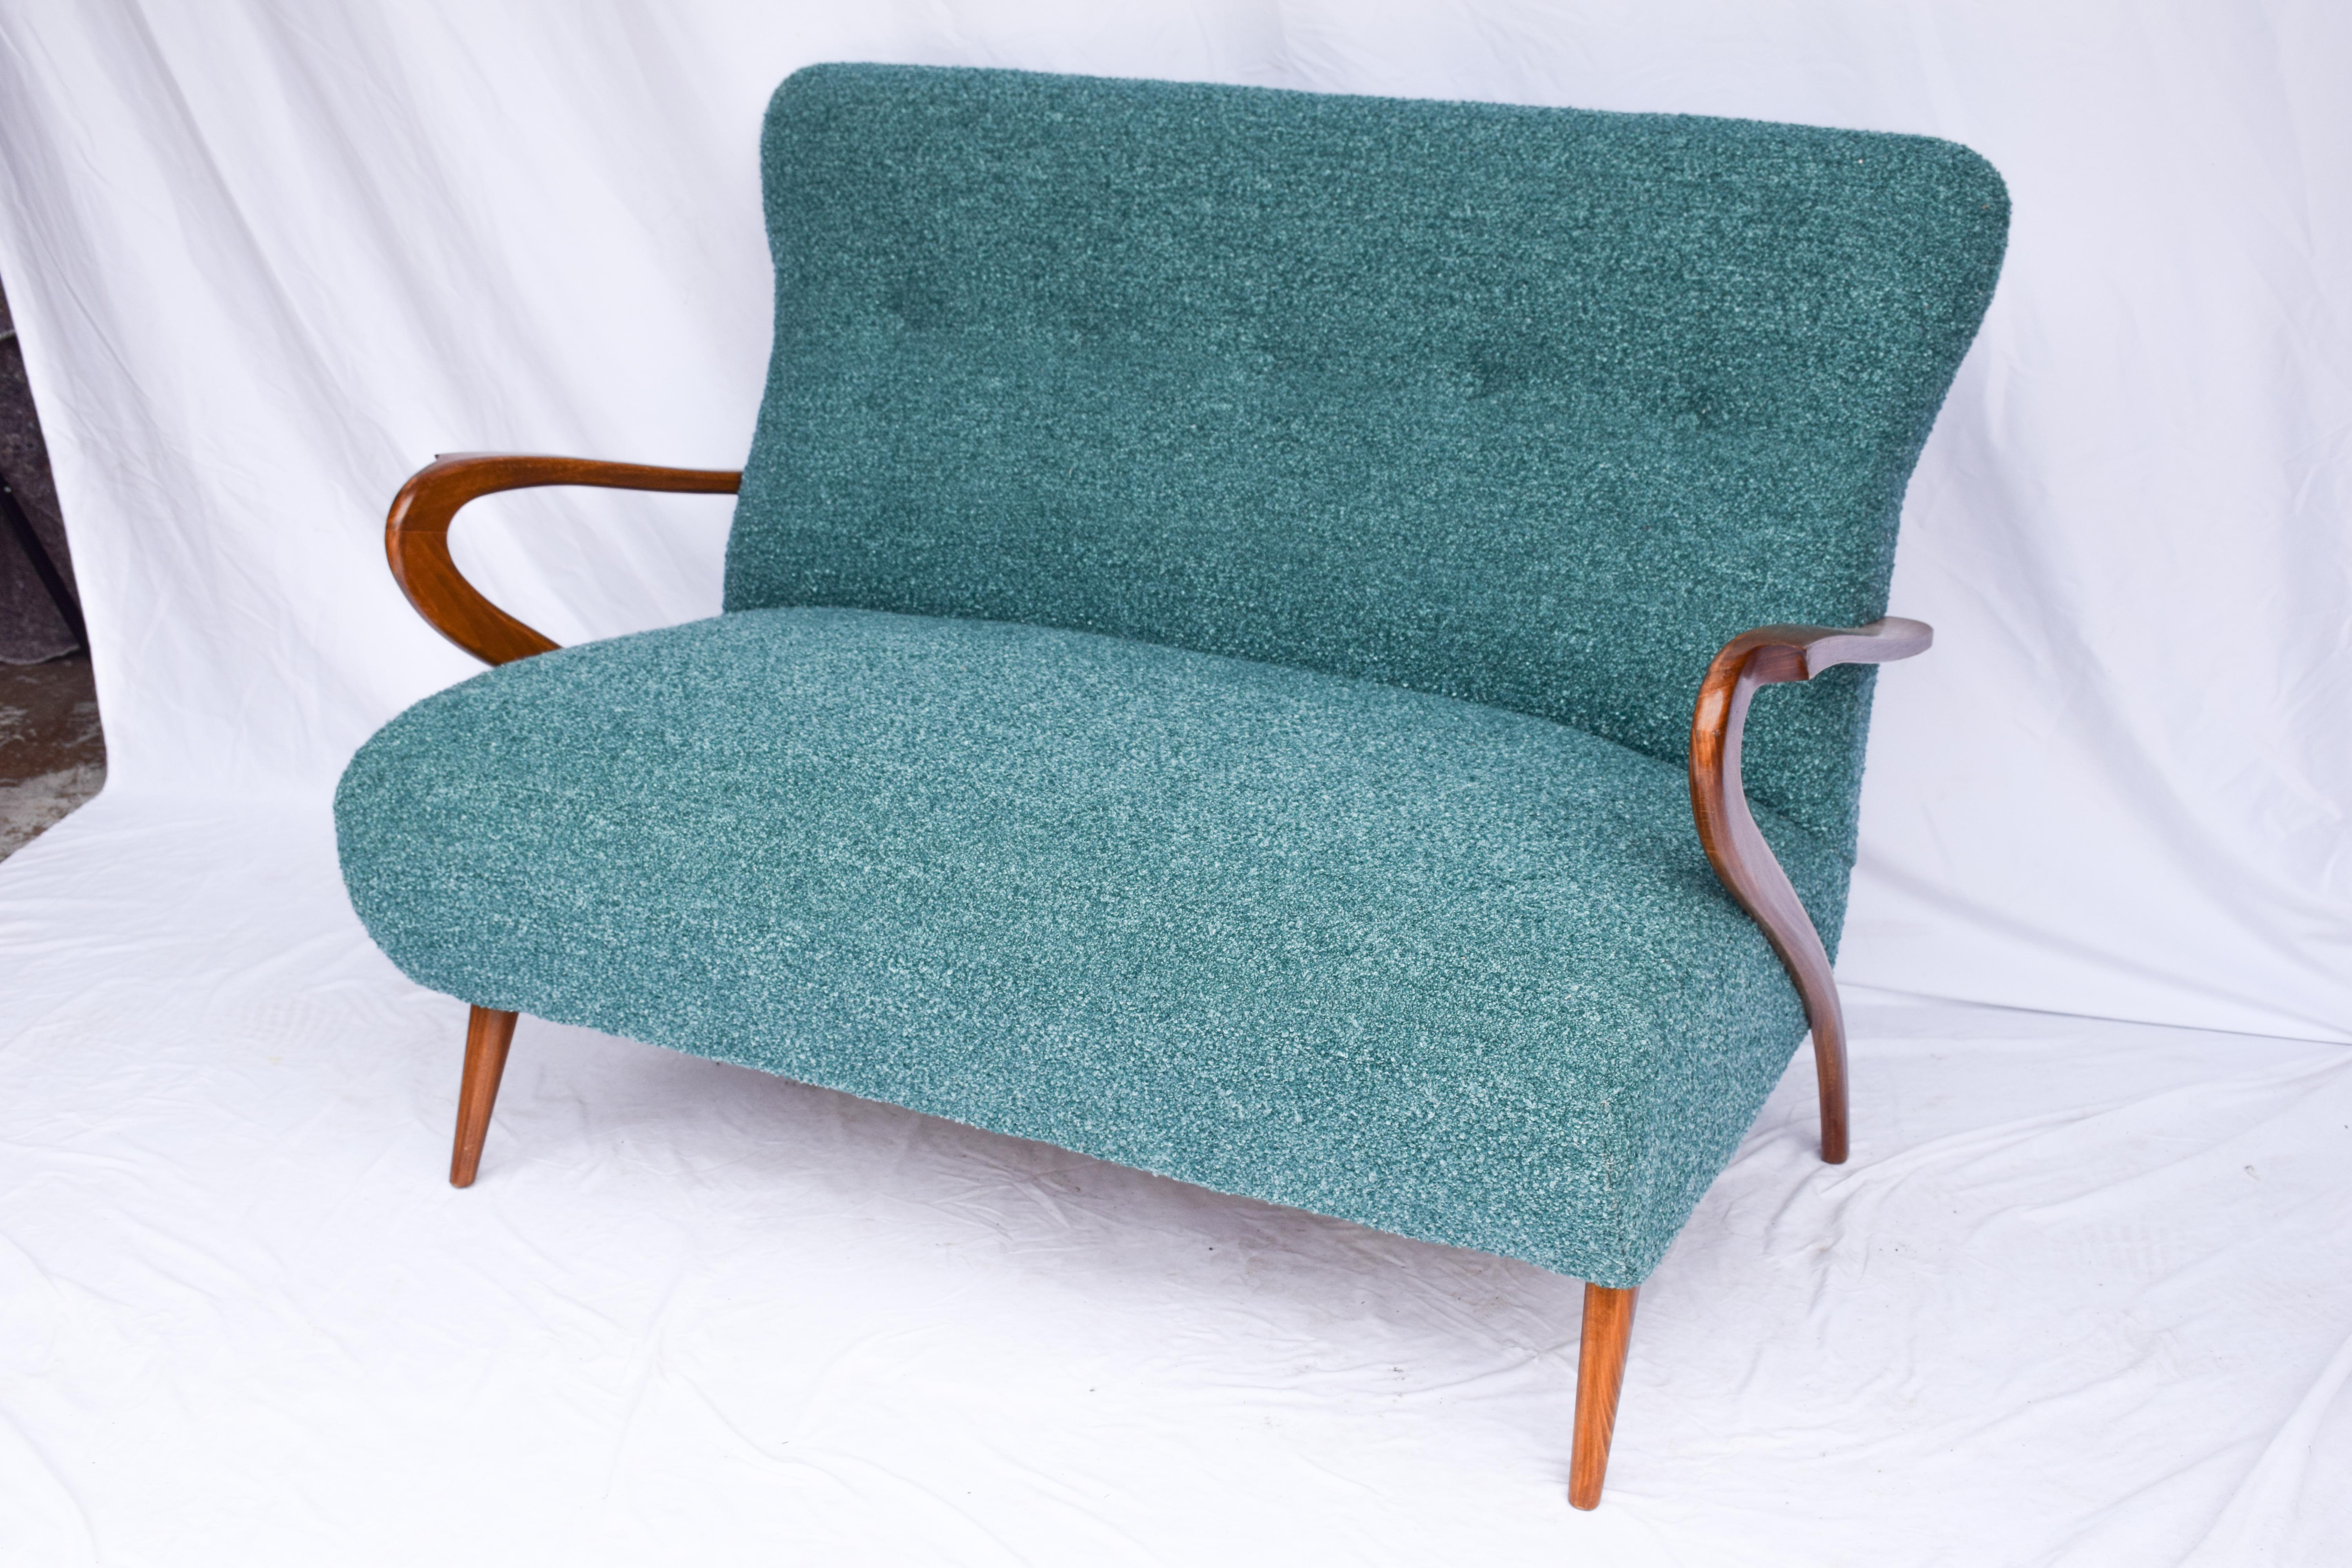 Explore the elegance of this Italian mid-century style settee. Upholstered in a Teal/Green/Blue nubby bouclé fabric. Discover the timeless sophistication and comfort of this stylish piece for your home or office. Found at an antique fair in the